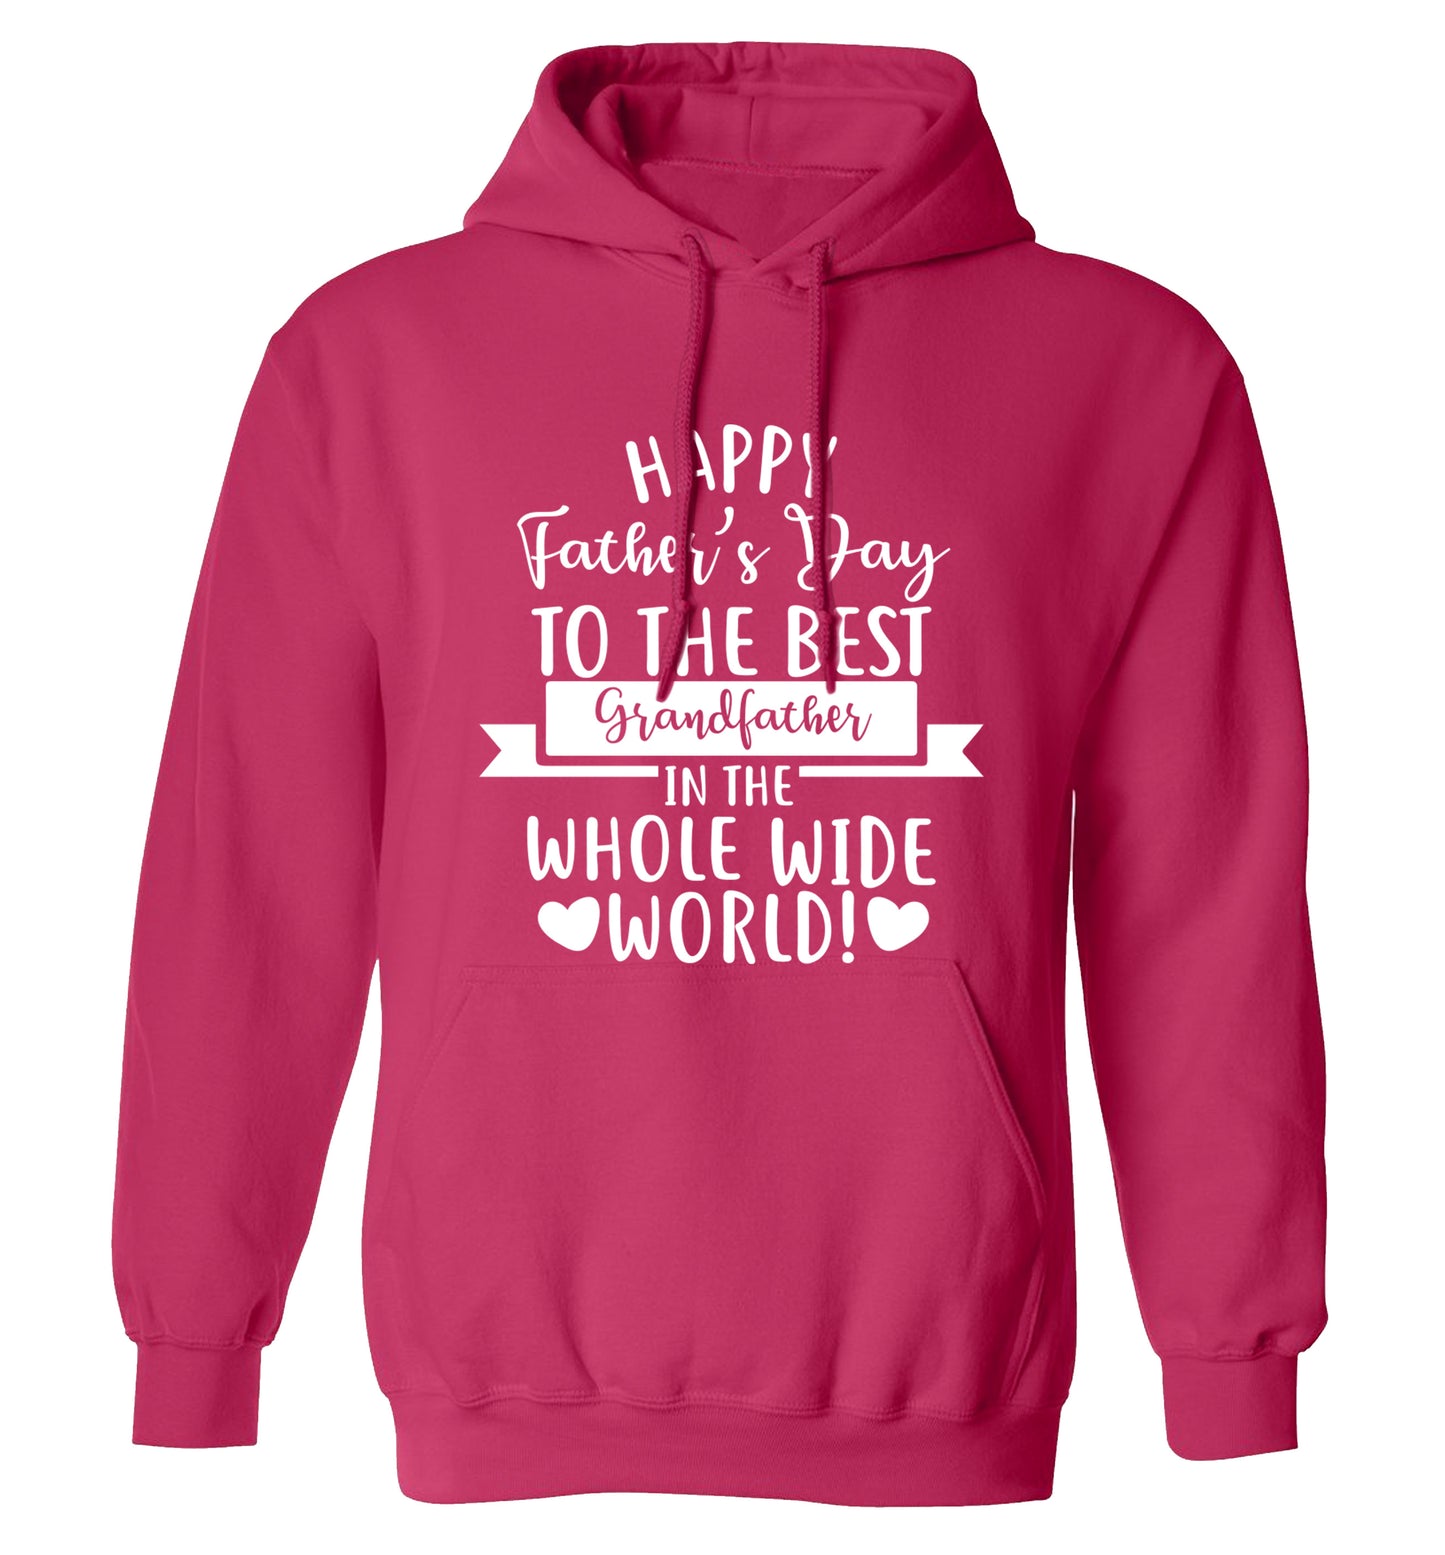 Happy Father's Day to the best grandfather in the world adults unisex pink hoodie 2XL